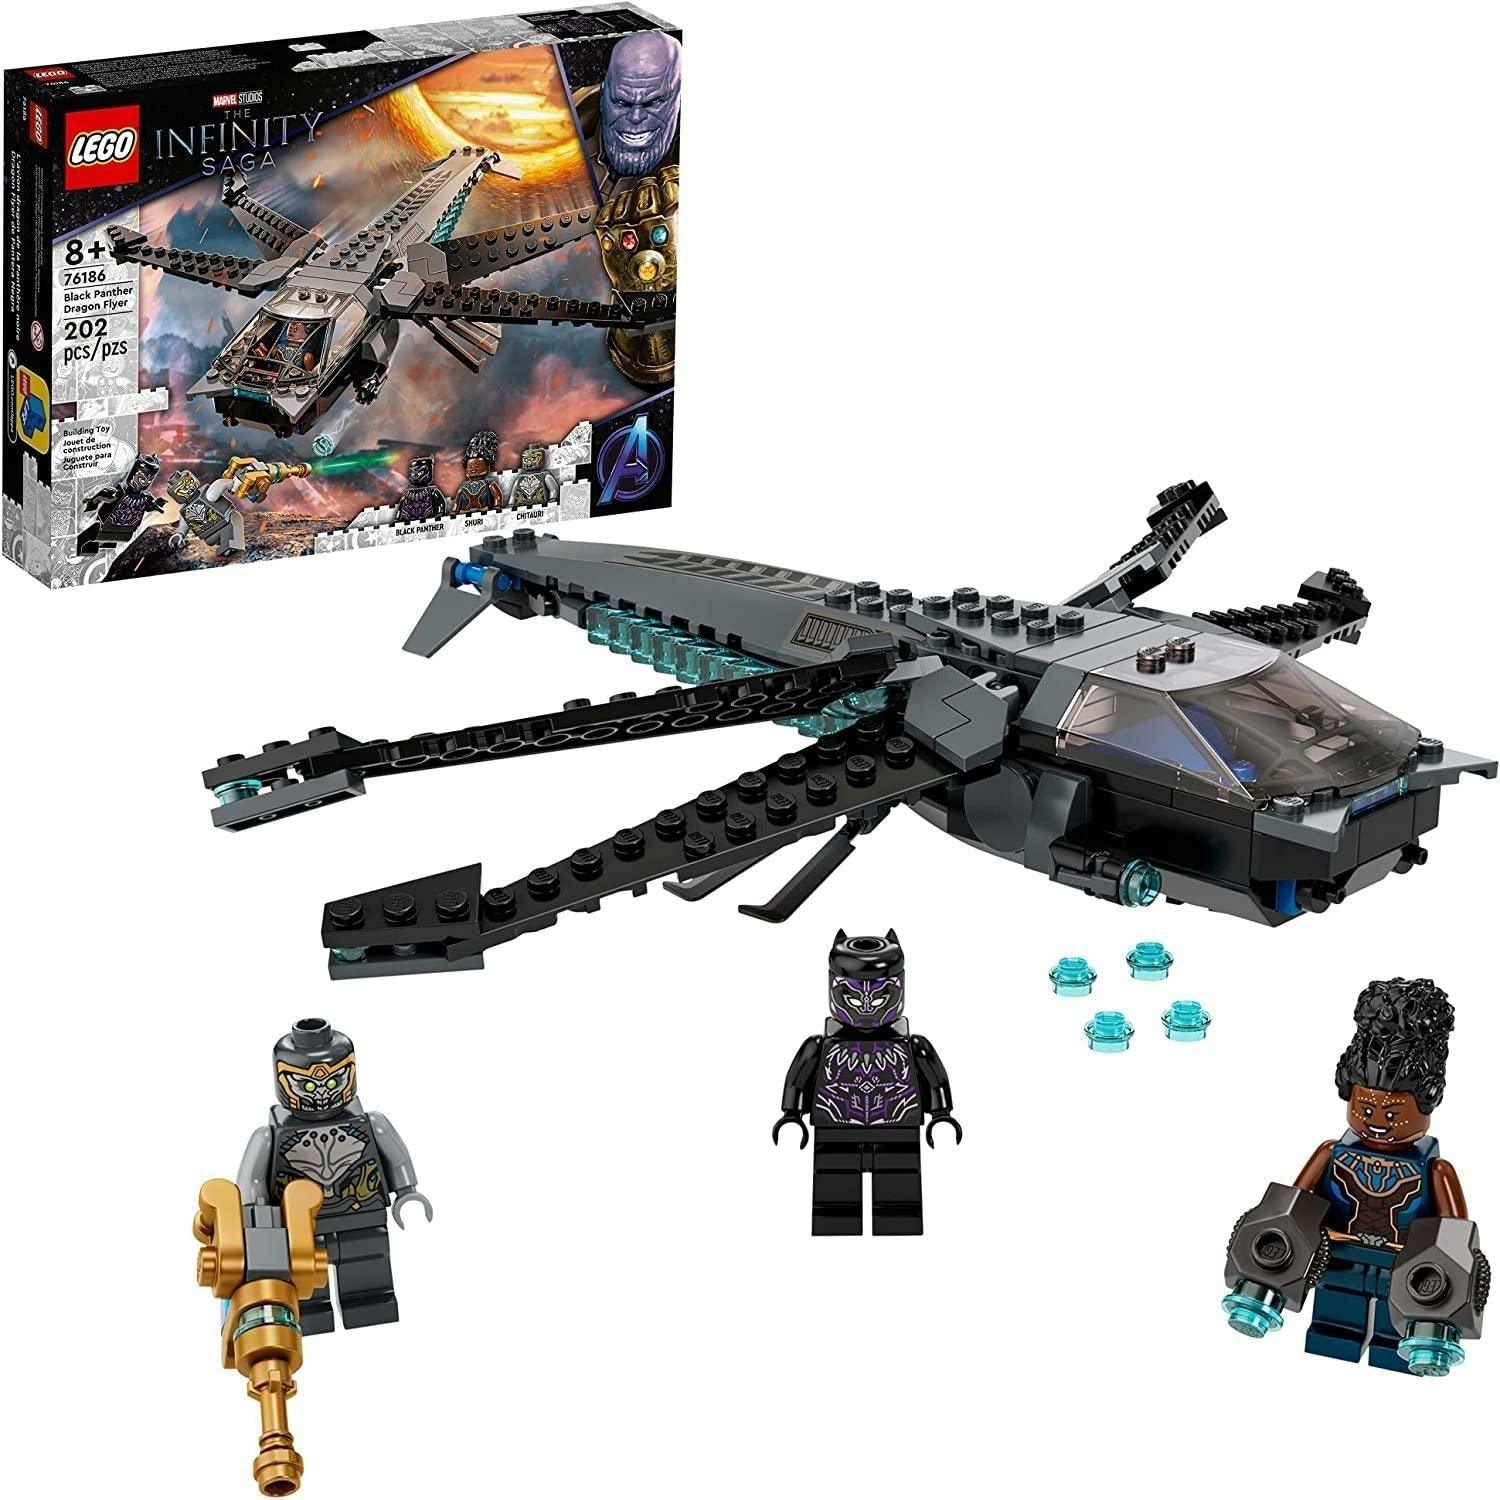 LEGO 76186 Marvel Black Panther Dragon Flyer Create The Final Battle Scene from Avengers Endgame New 2021 (202 Pieces) - BumbleToys - 8+ Years, 8-13 Years, Action Figures, Avengers, Black Panther, Boys, Figures, LEGO, Marvel, OXE, Pre-Order